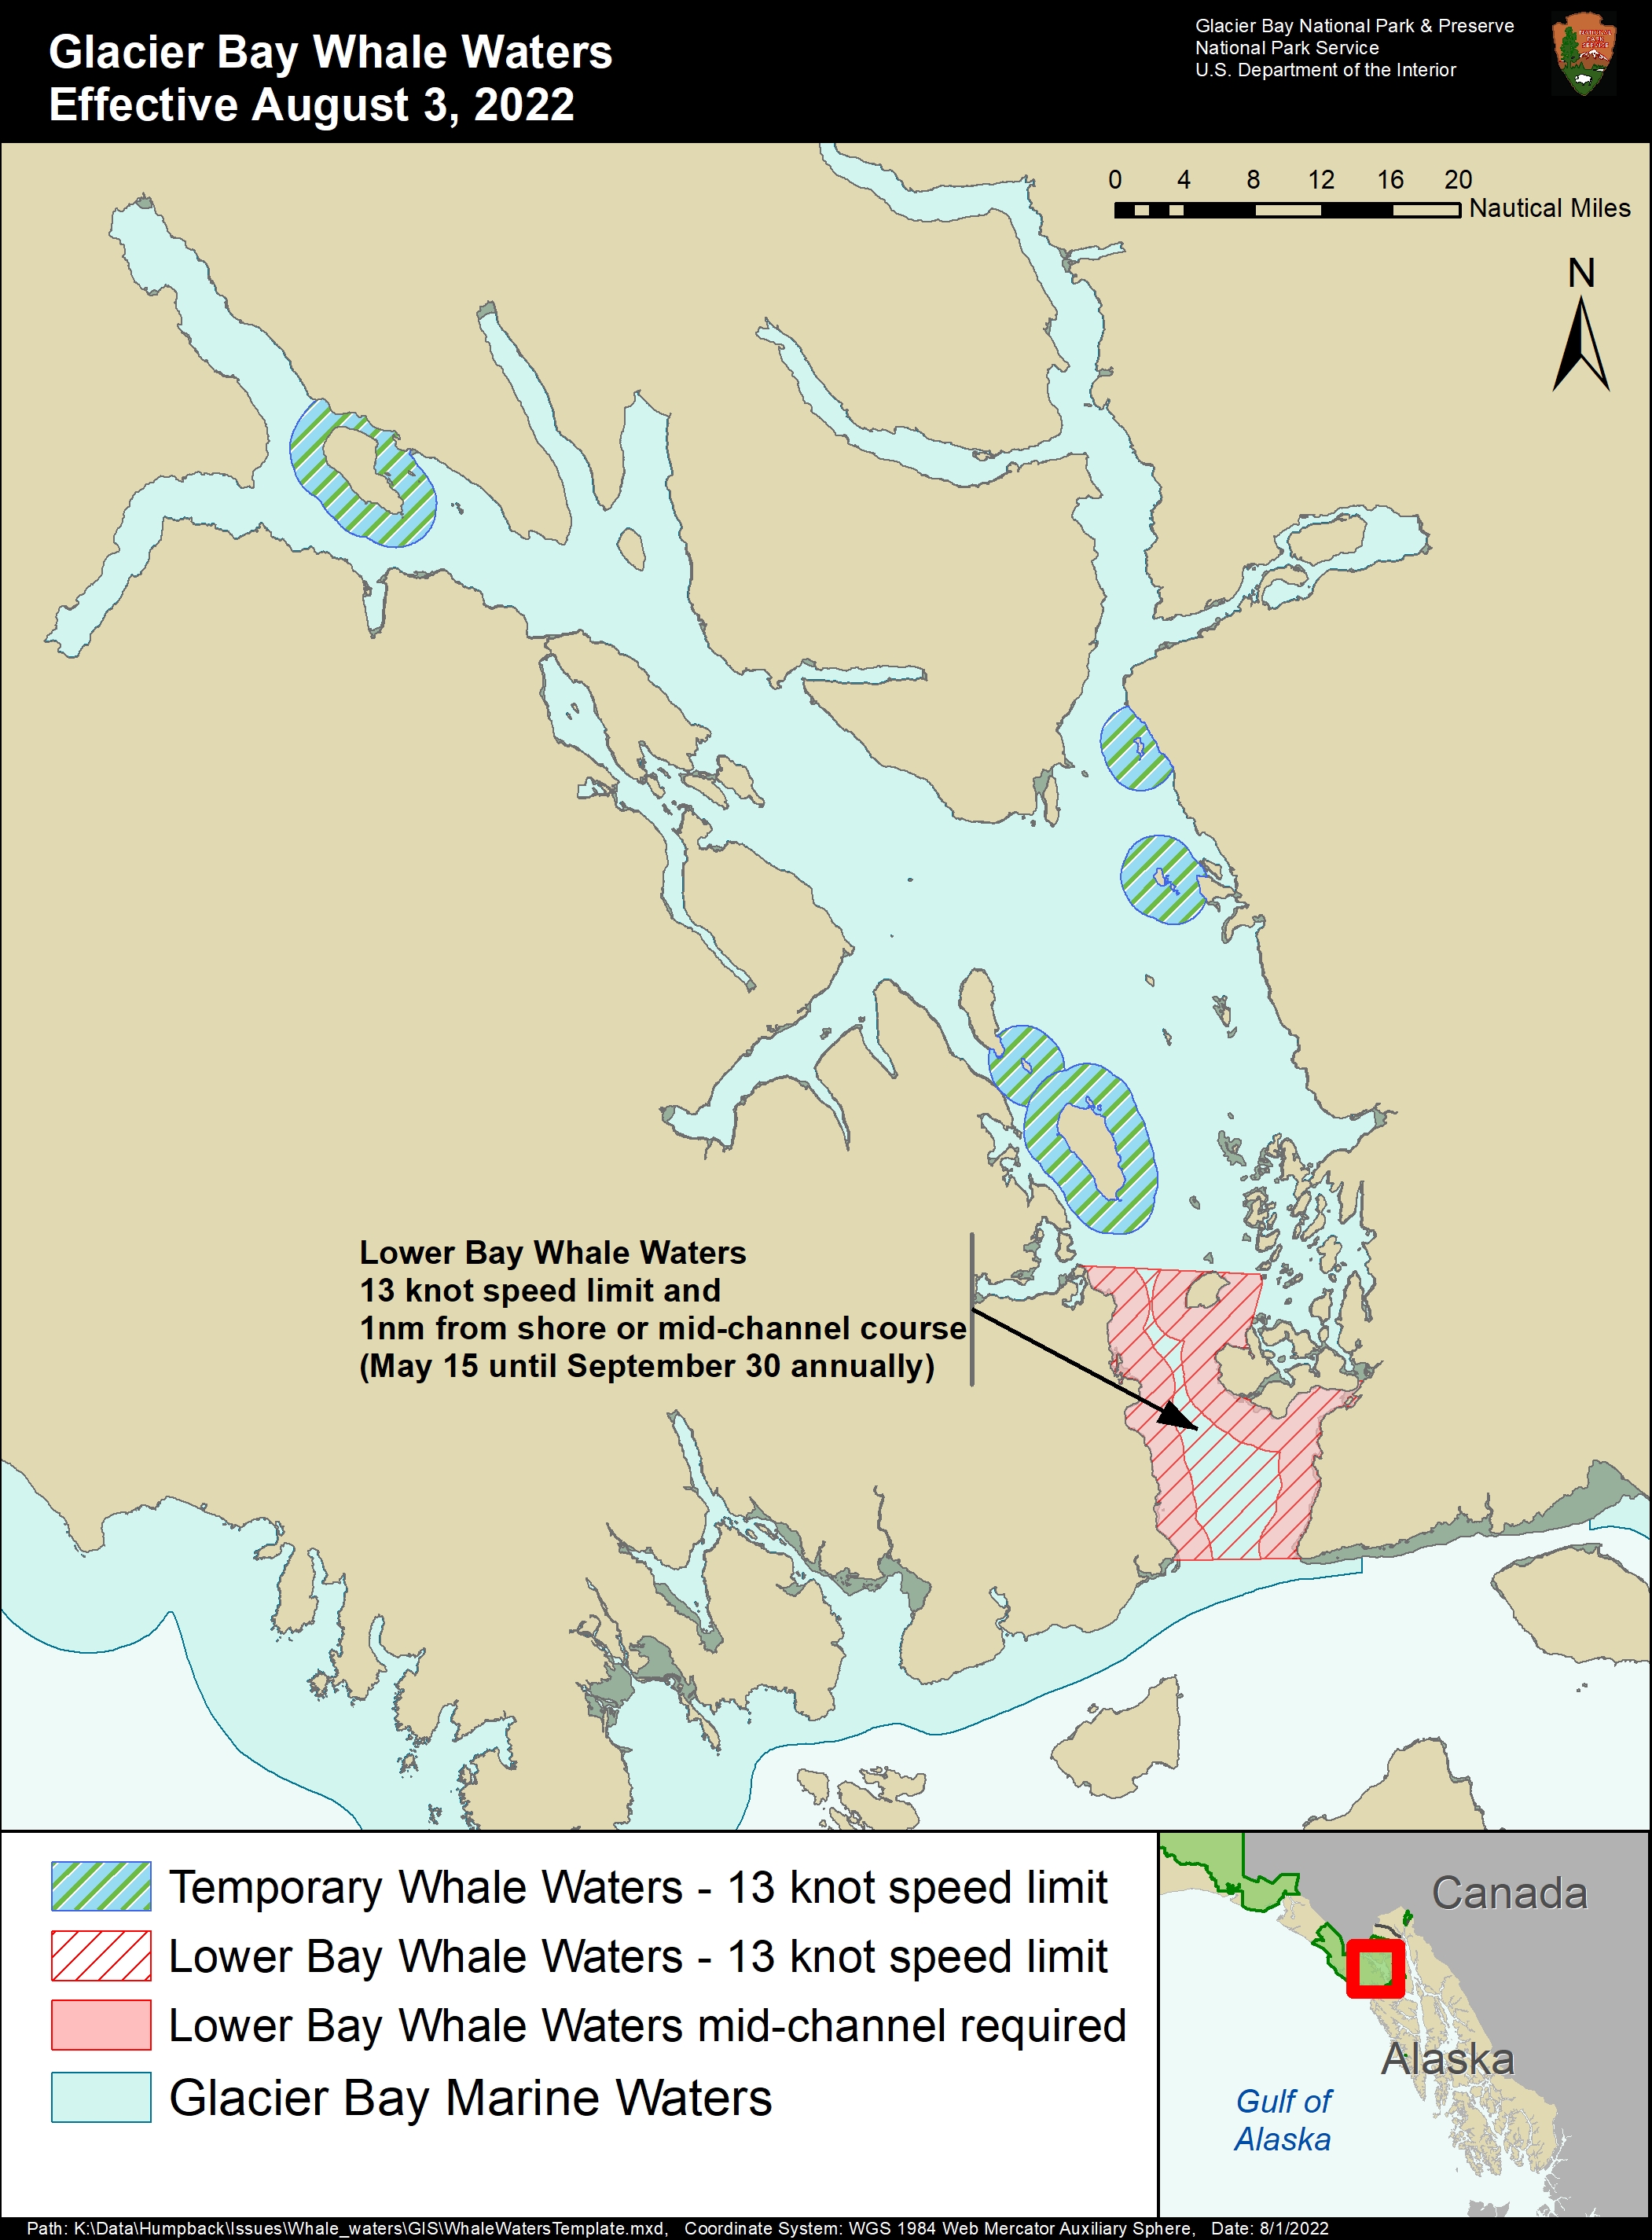 whale waters map for August 3, 2022. Contact the park for precise details of this map 907-697-2230